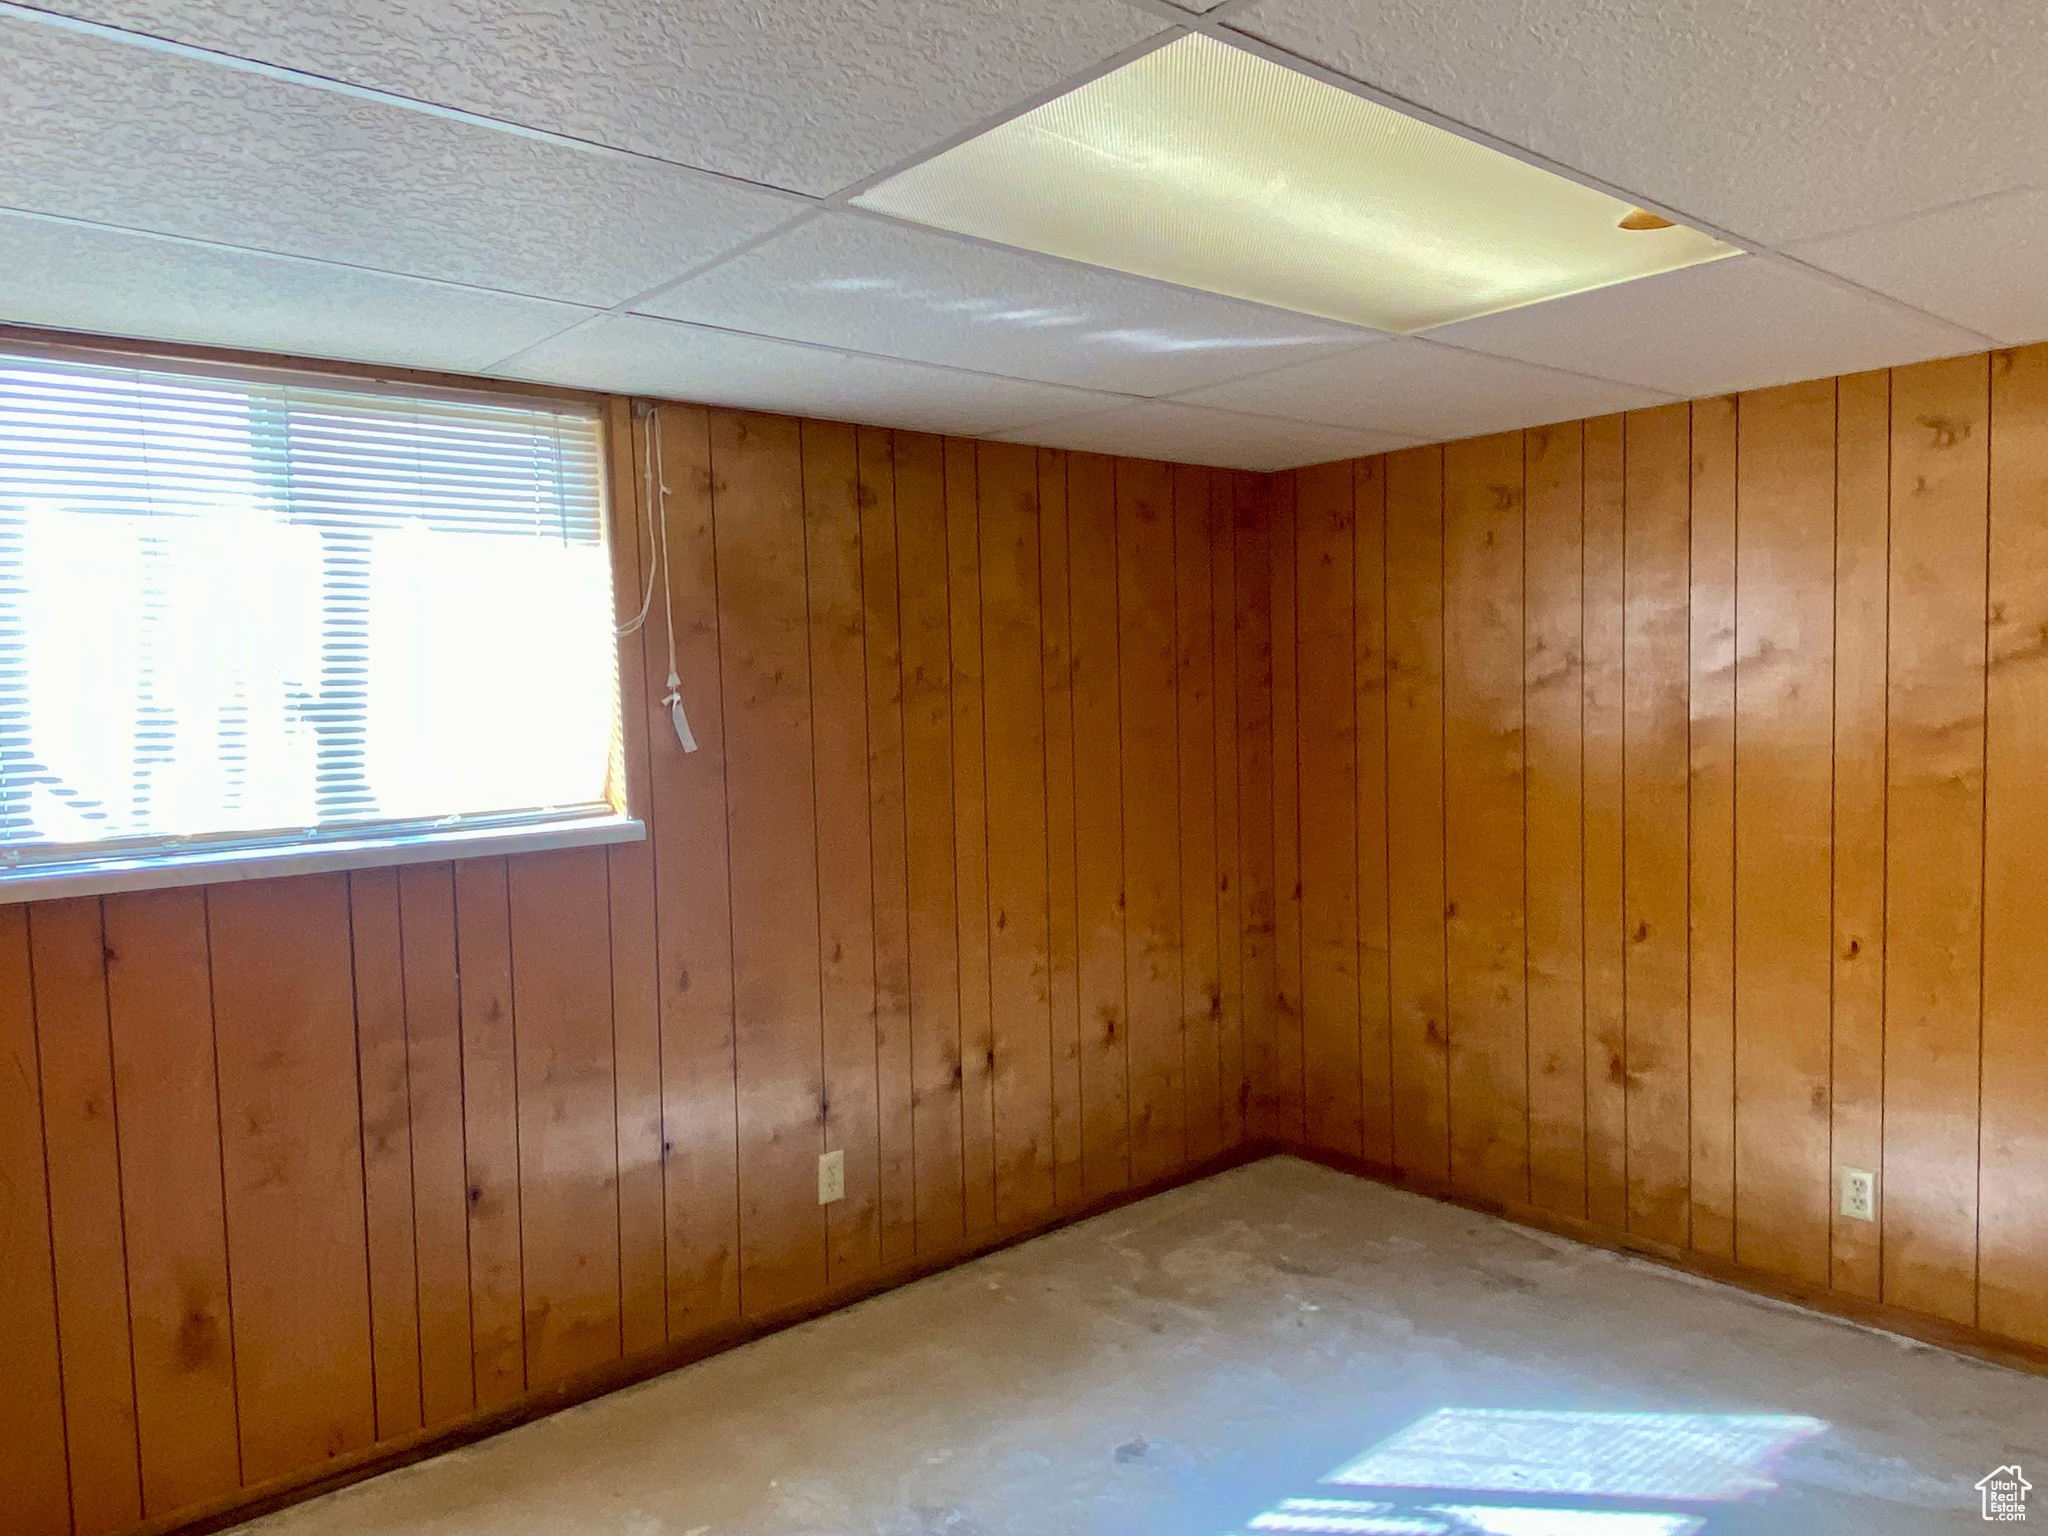 Spare room with wooden walls and a drop ceiling